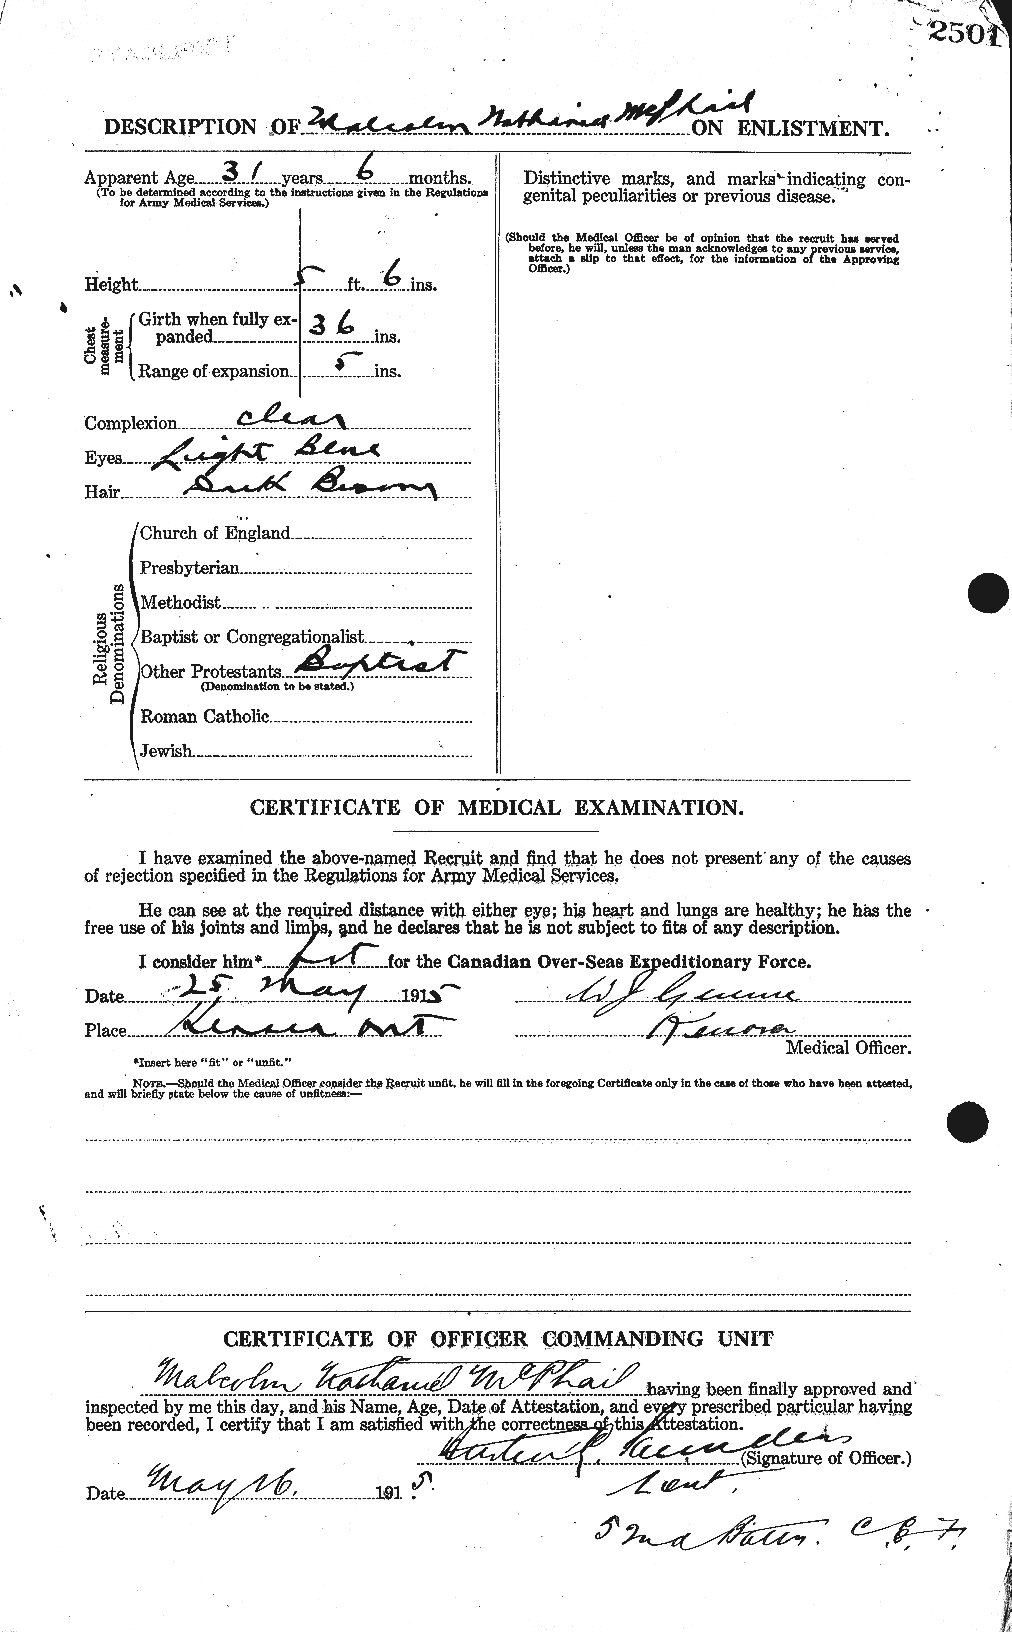 Personnel Records of the First World War - CEF 540892b